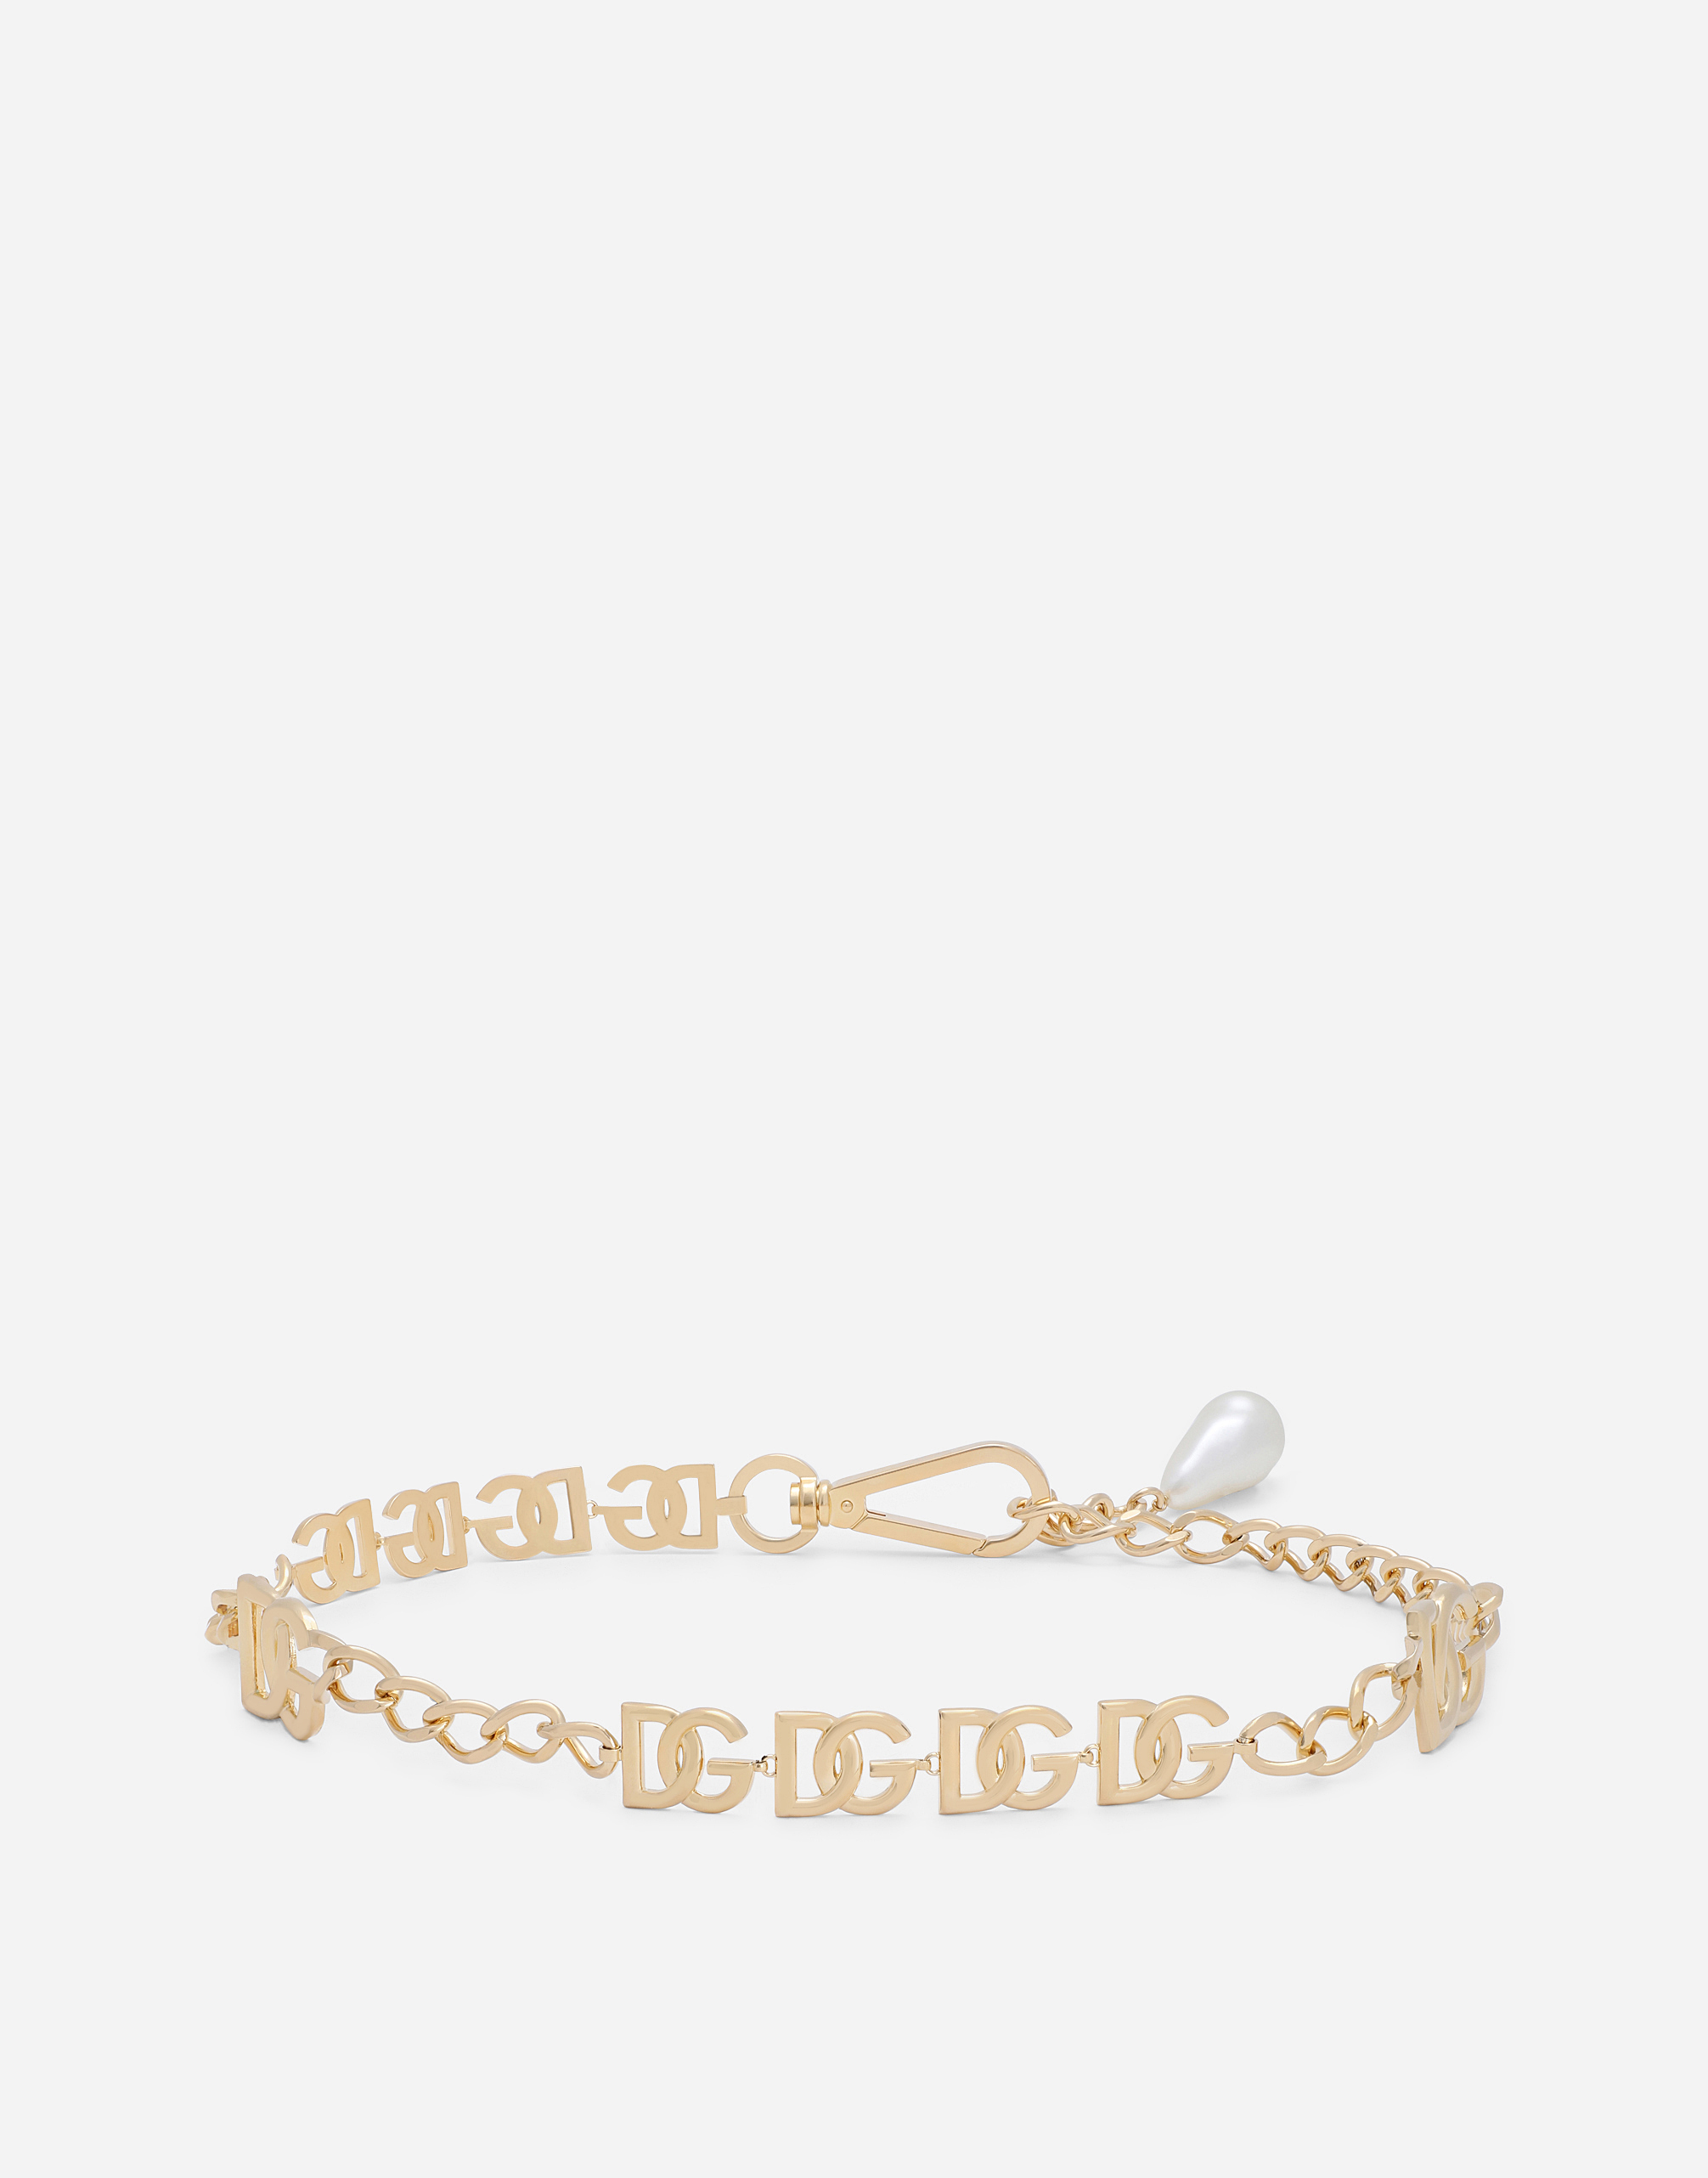 Chain belt with DG multi-logo in Gold